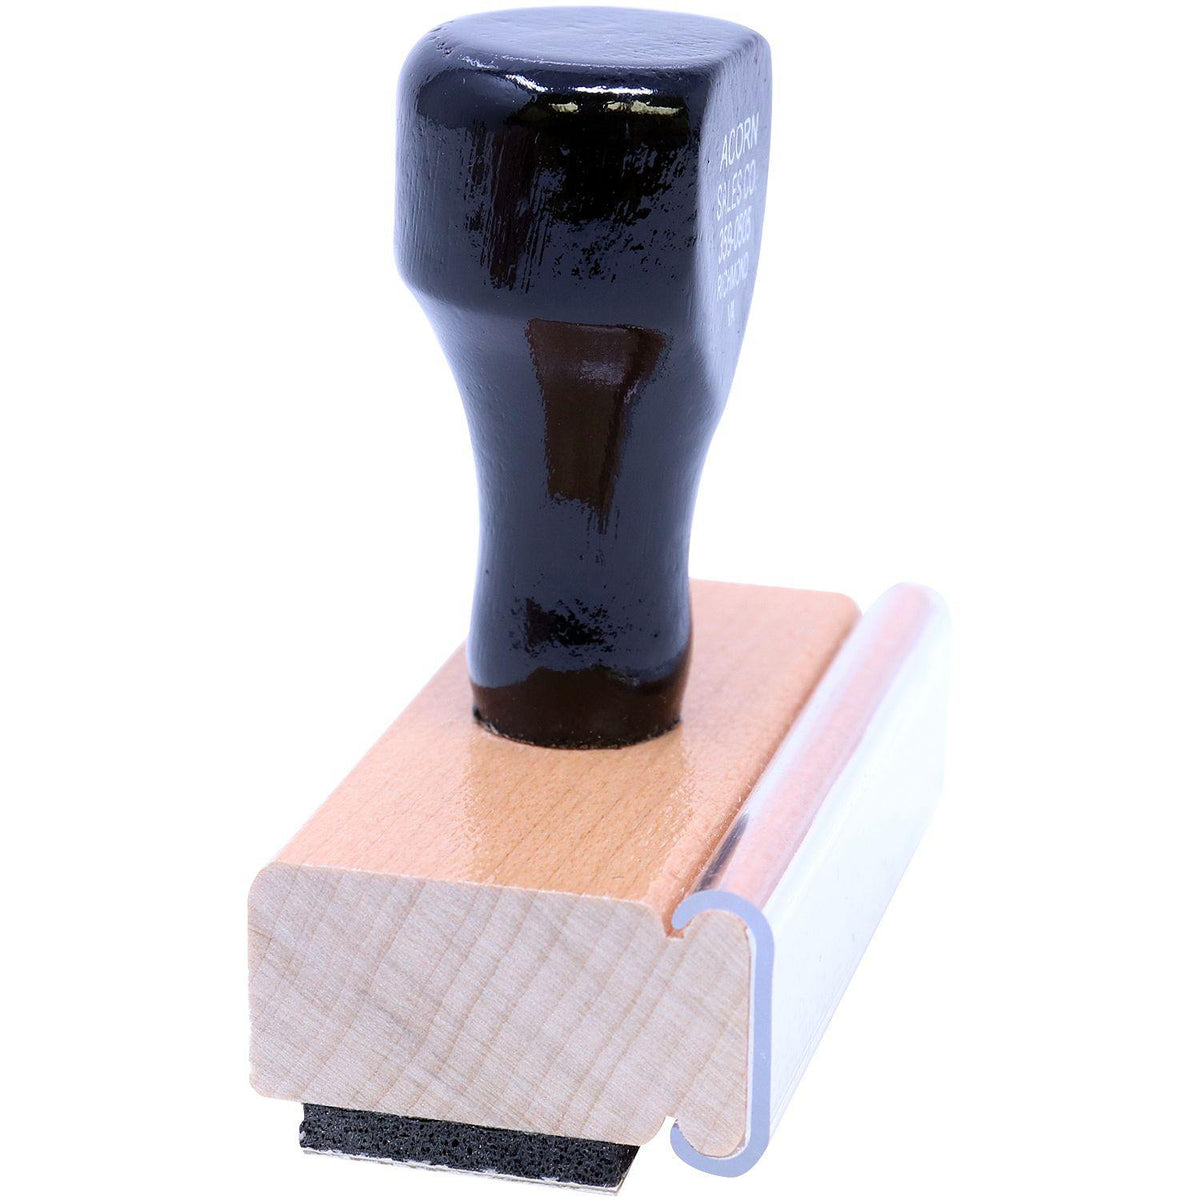 Side View of Two Line Received Rubber Stamp at an Angle